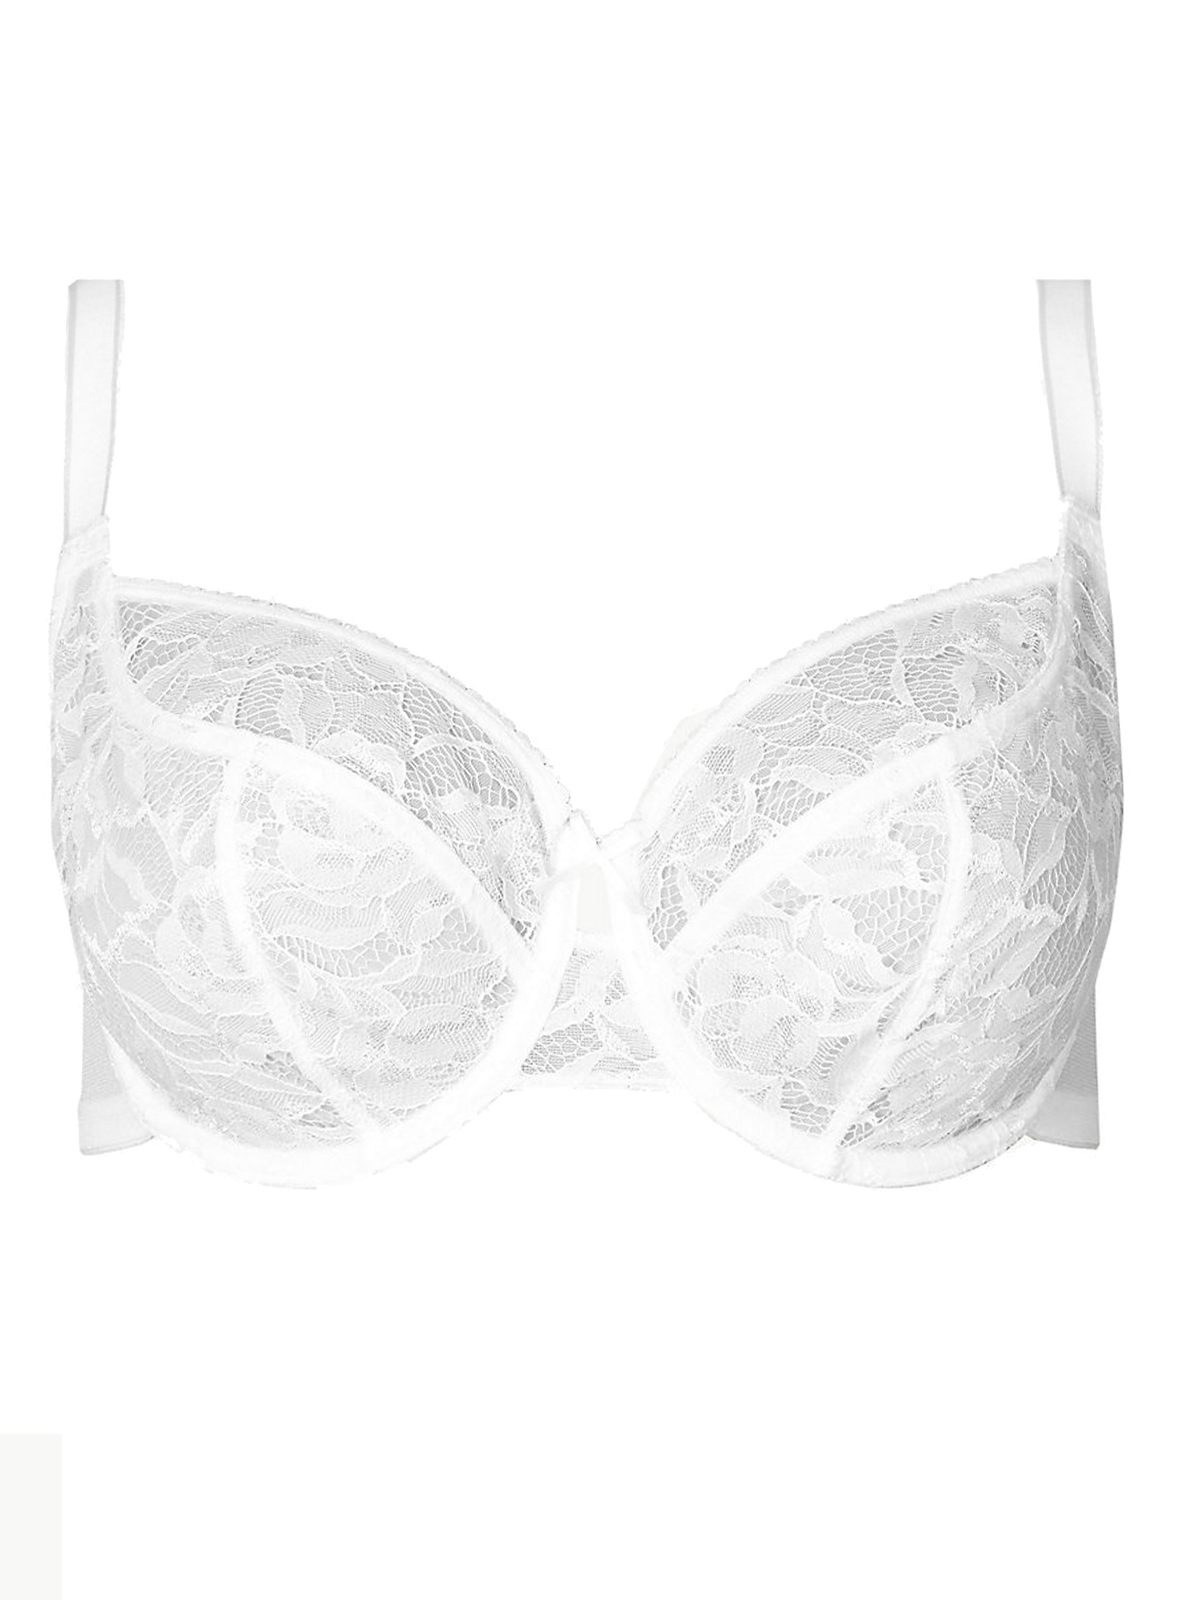 Marks and Spencer - - M&5 WHITE Lace Non-Padded Full Cup Bra - Size 44 ...